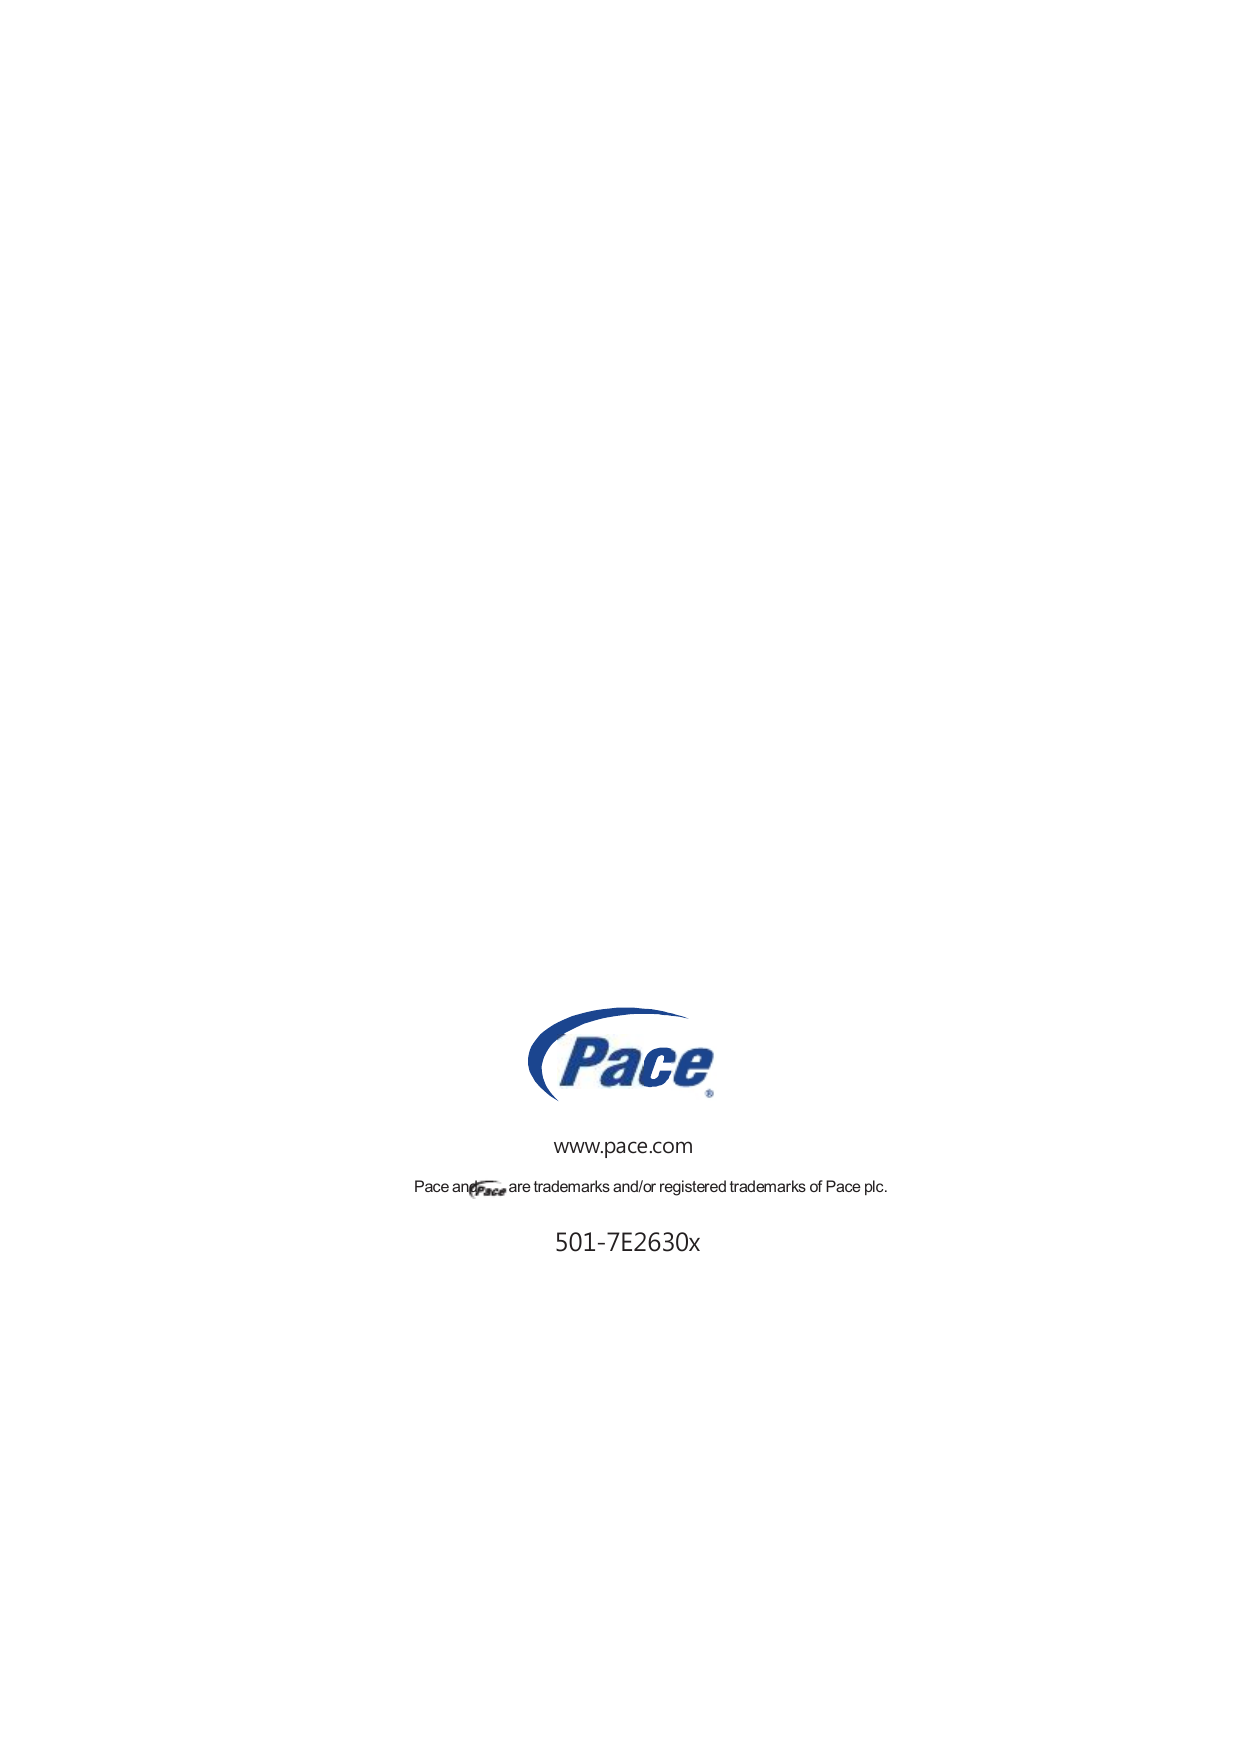                                            www.pace.com Pace and are trademarks and/or registered trademarks of Pace plc.  501-7E2630x 